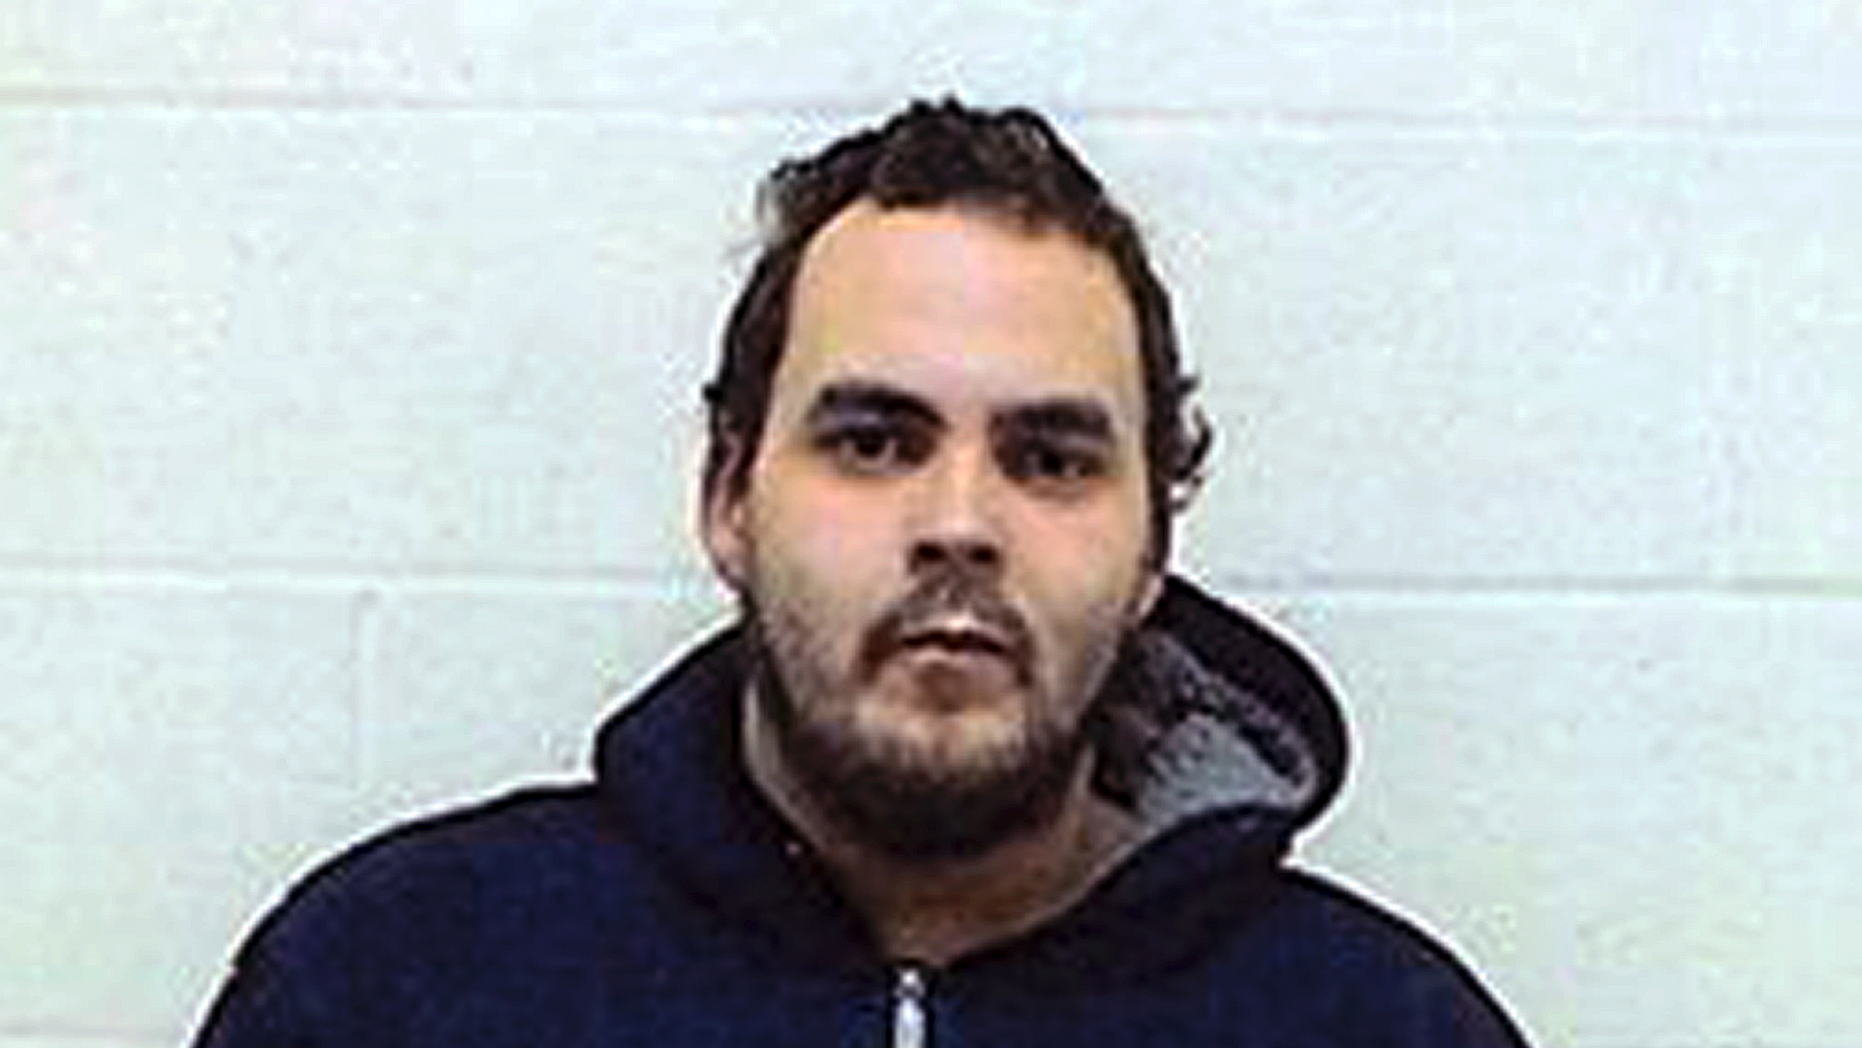 This undated booking photo posted on a search poster by the Torrington, Connecticut Police Department, on his Facebook page, shows Jose Simms, a fugitive who seeks seven arrest warrants after failing to appear in court . A ministry official reached an agreement with the fugitive on Wednesday, May 22, 2019, who agreed to surrender when there were 15,000 wanted posters on social media. (Torrington Police Department via AP)